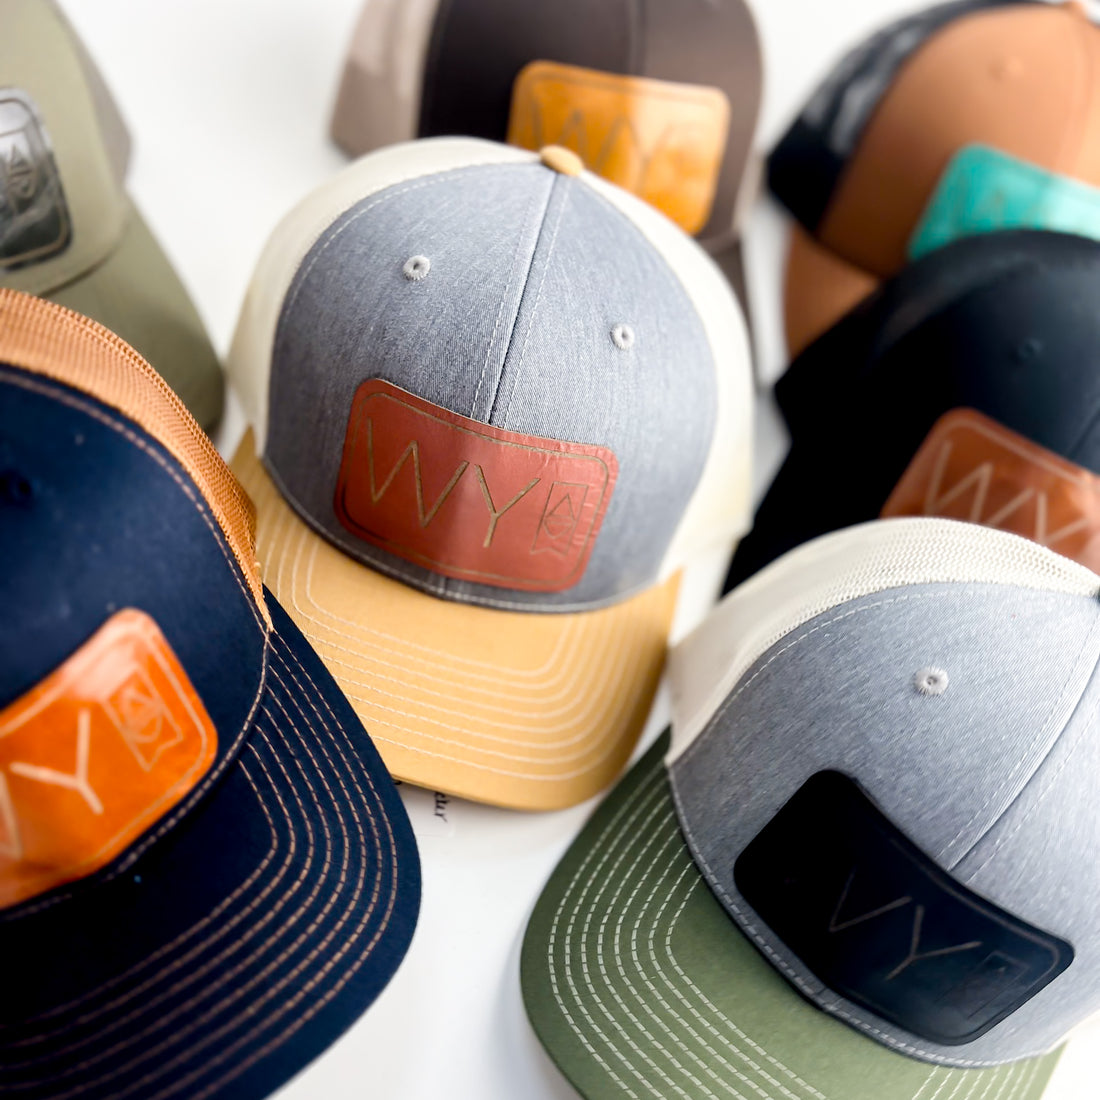 WY Trucker Hat | Olive Green + Navy Patch